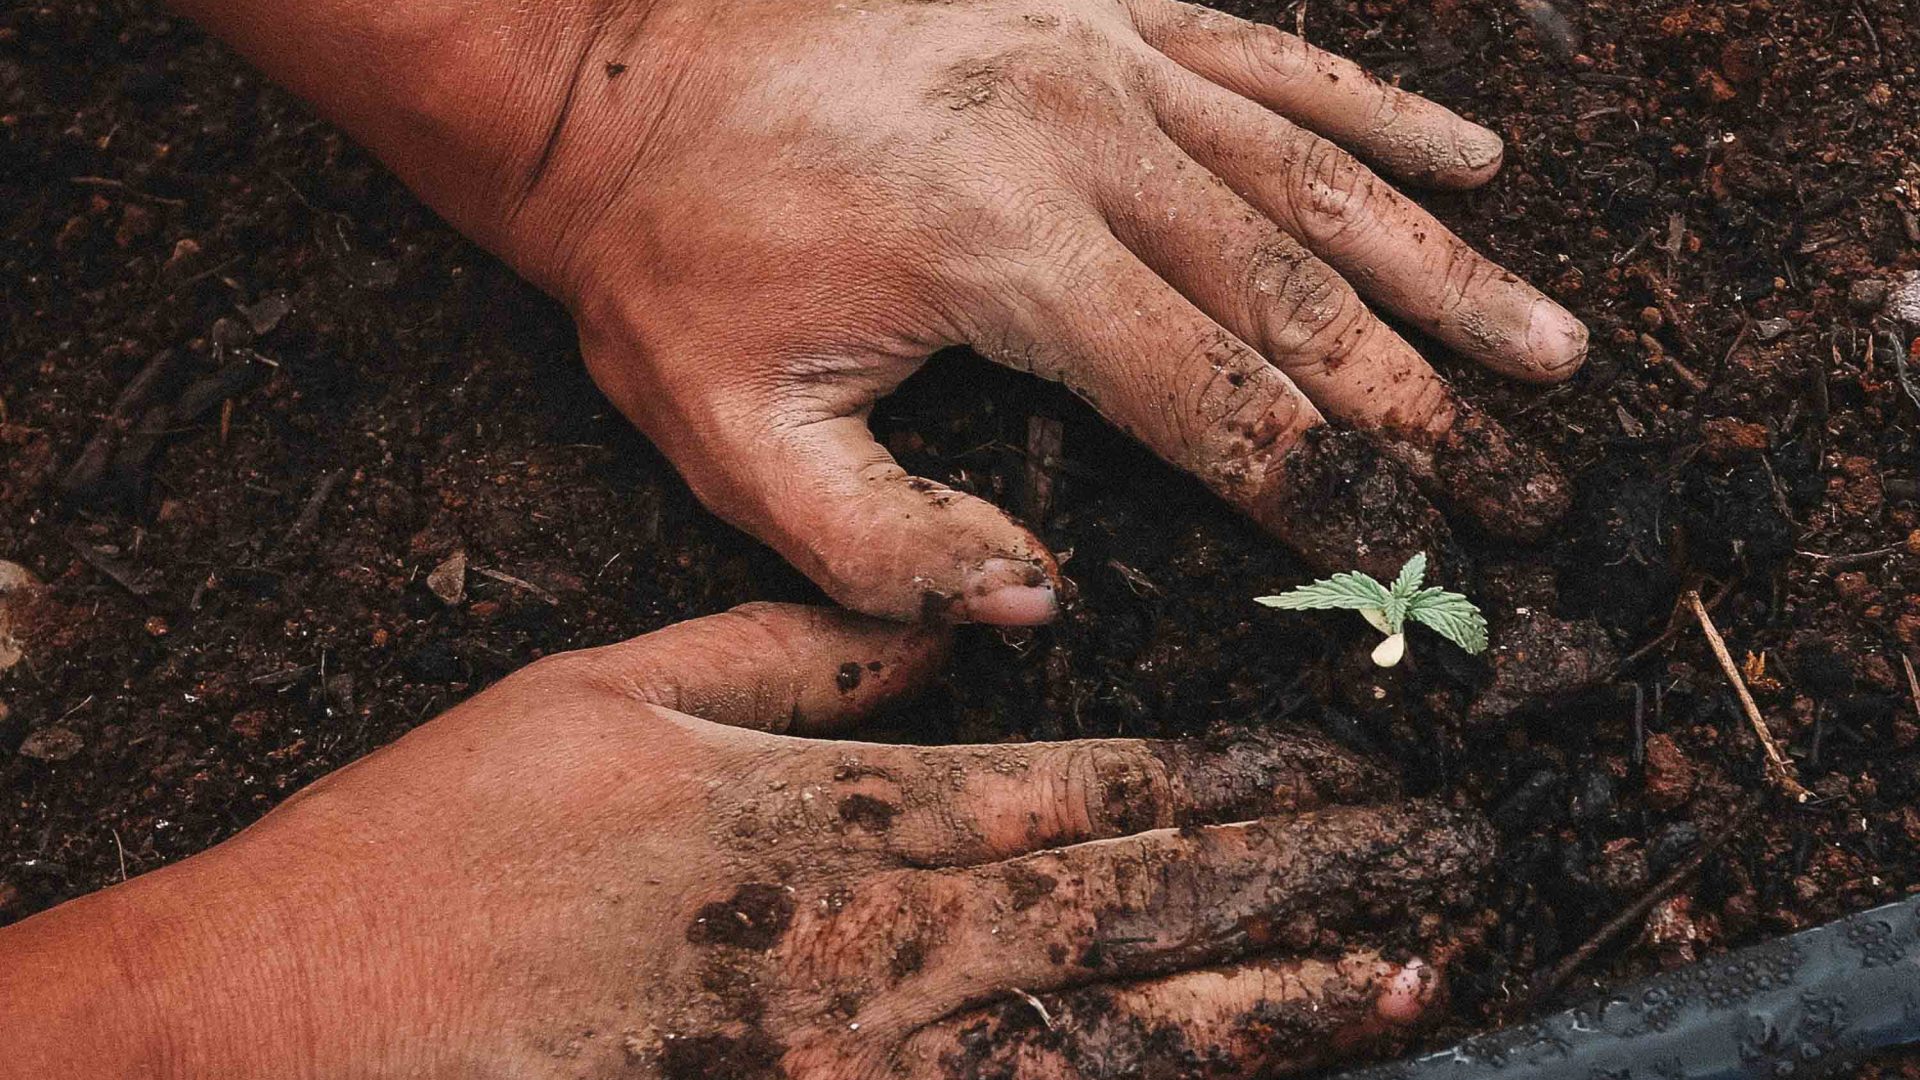 Hands planting a small plant in the earth.